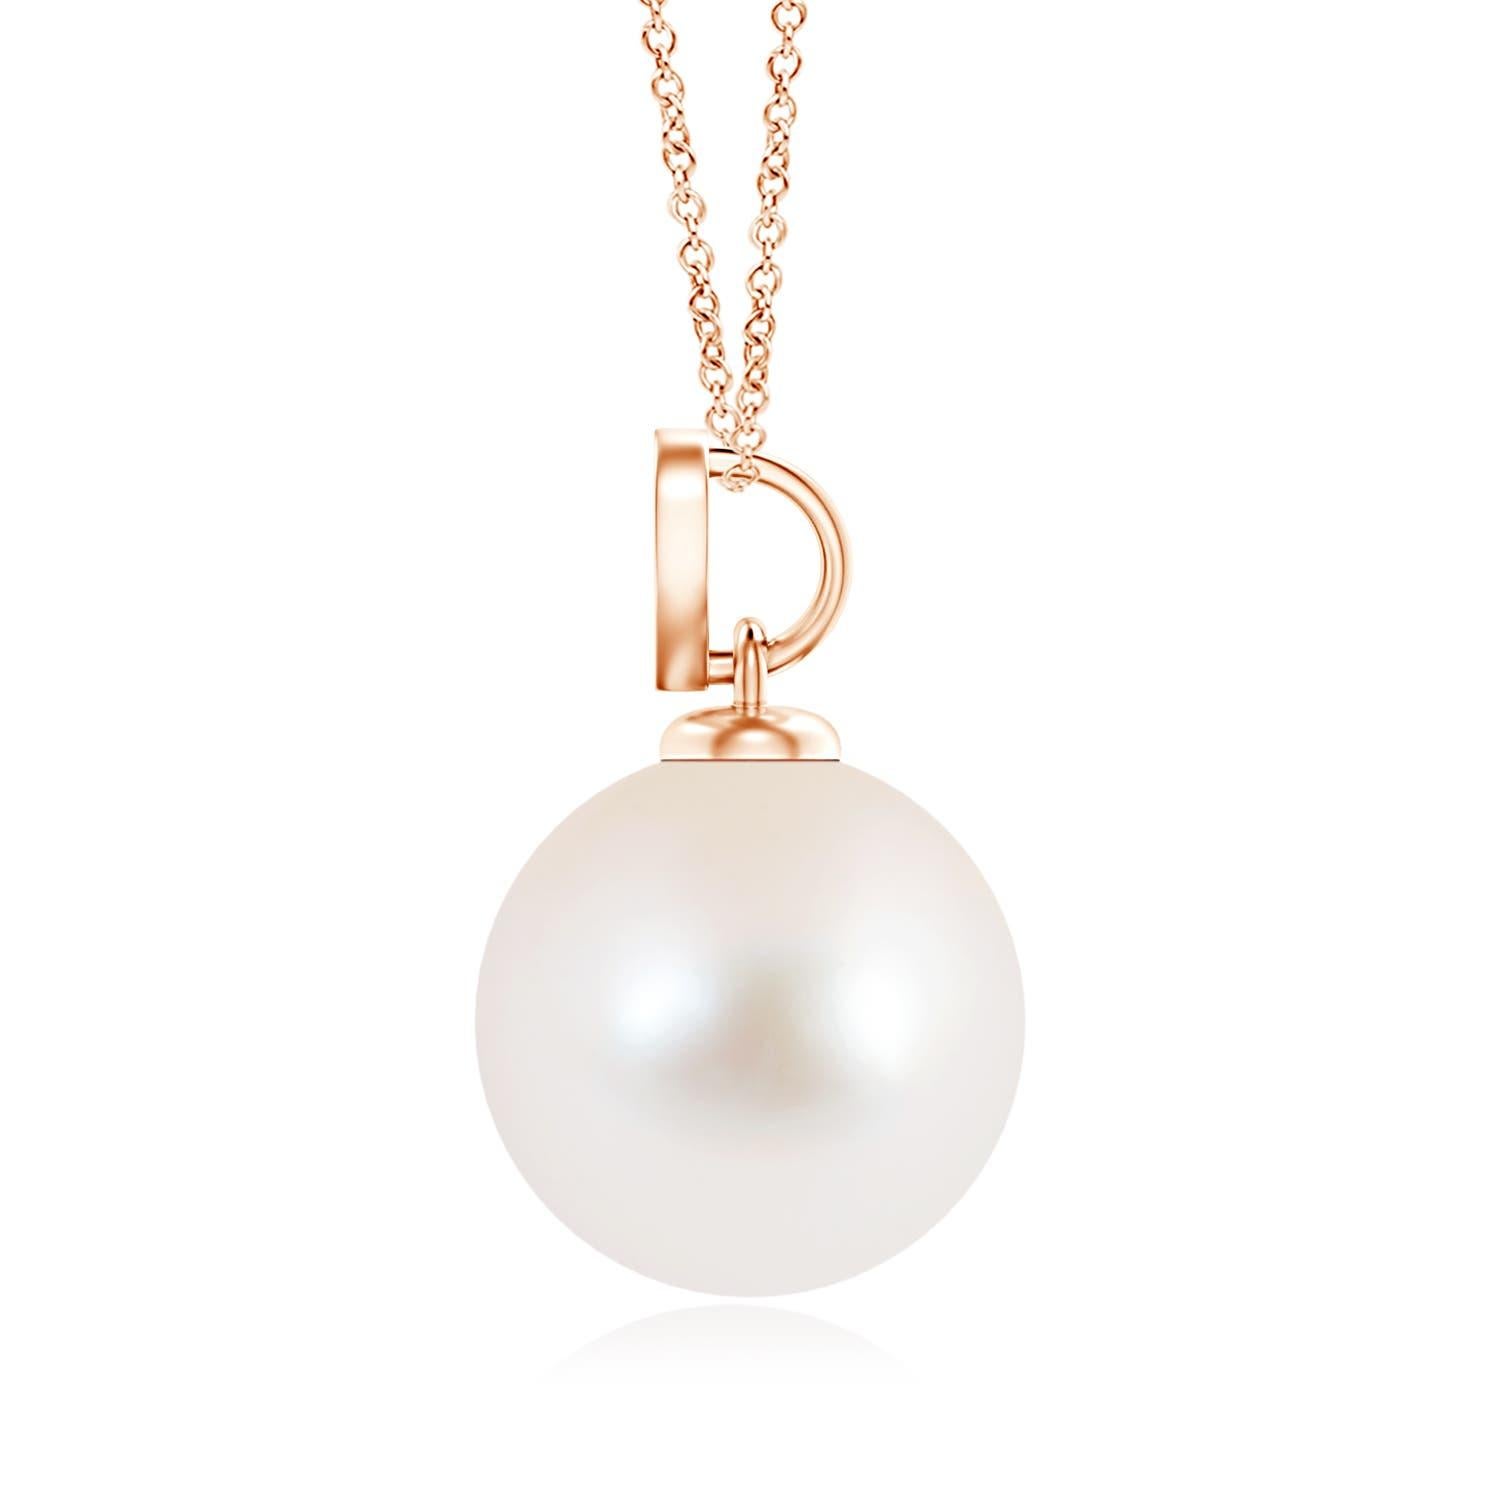 Nothing connotes love better than this charming diamond heart pendant in 14K rose gold. It features a round Freshwater cultured pearl that illuminates with its delightful hue, while the diamond studded heart motif adds a romantic touch to the